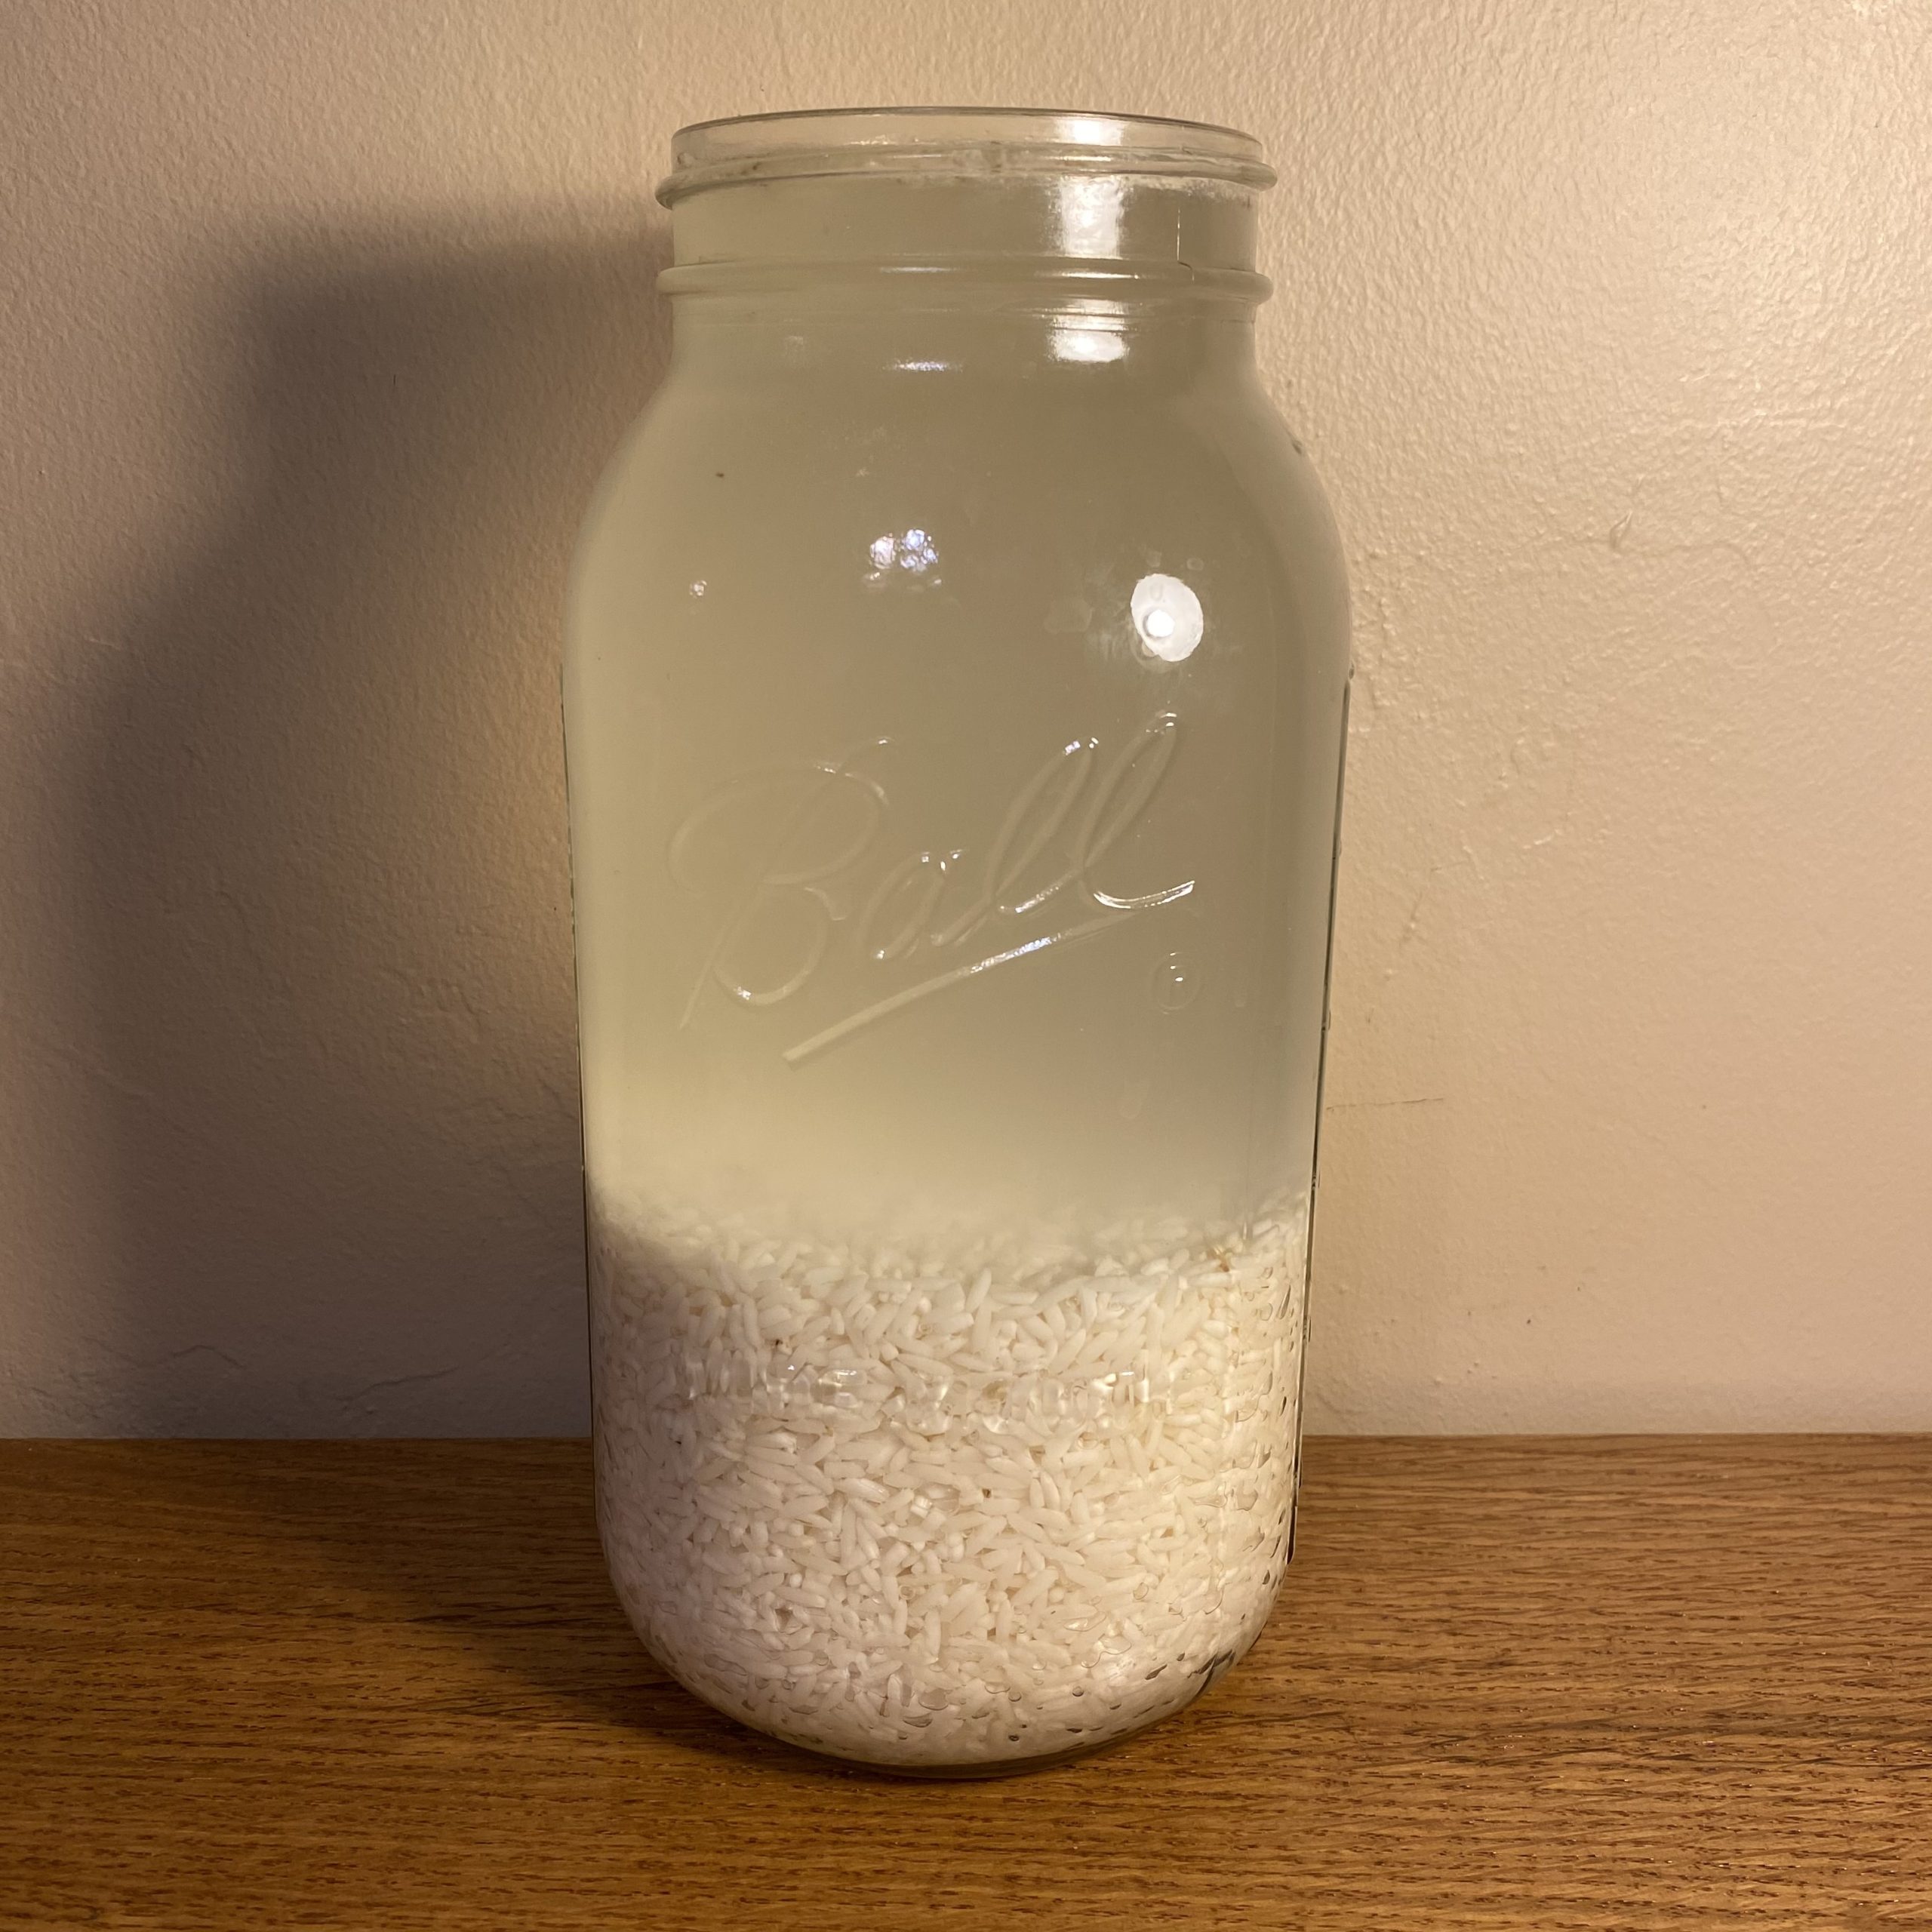 Fermented rice water (for hair) – Jenae Lawson